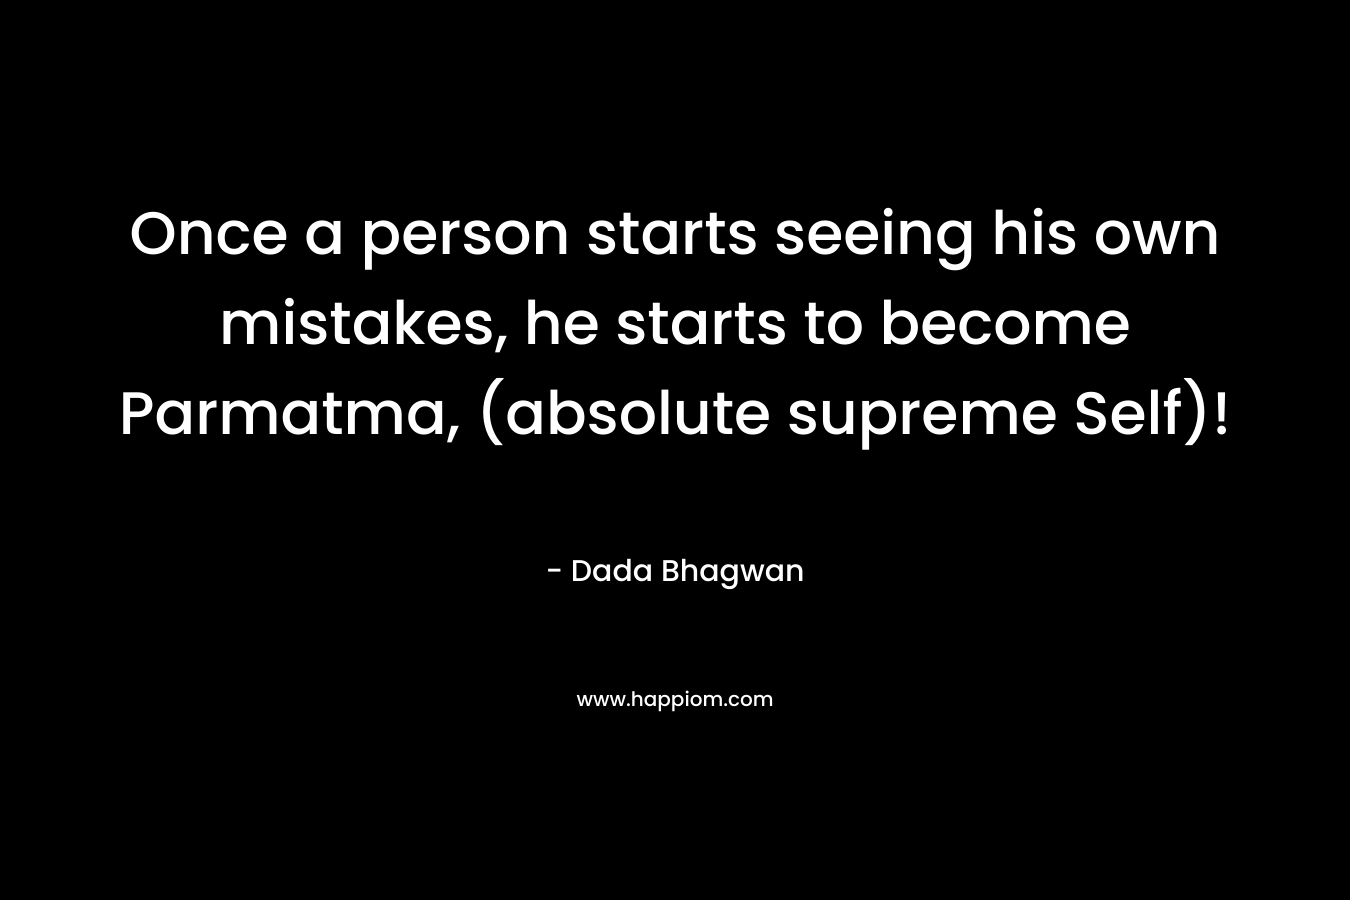 Once a person starts seeing his own mistakes, he starts to become Parmatma, (absolute supreme Self)! – Dada Bhagwan